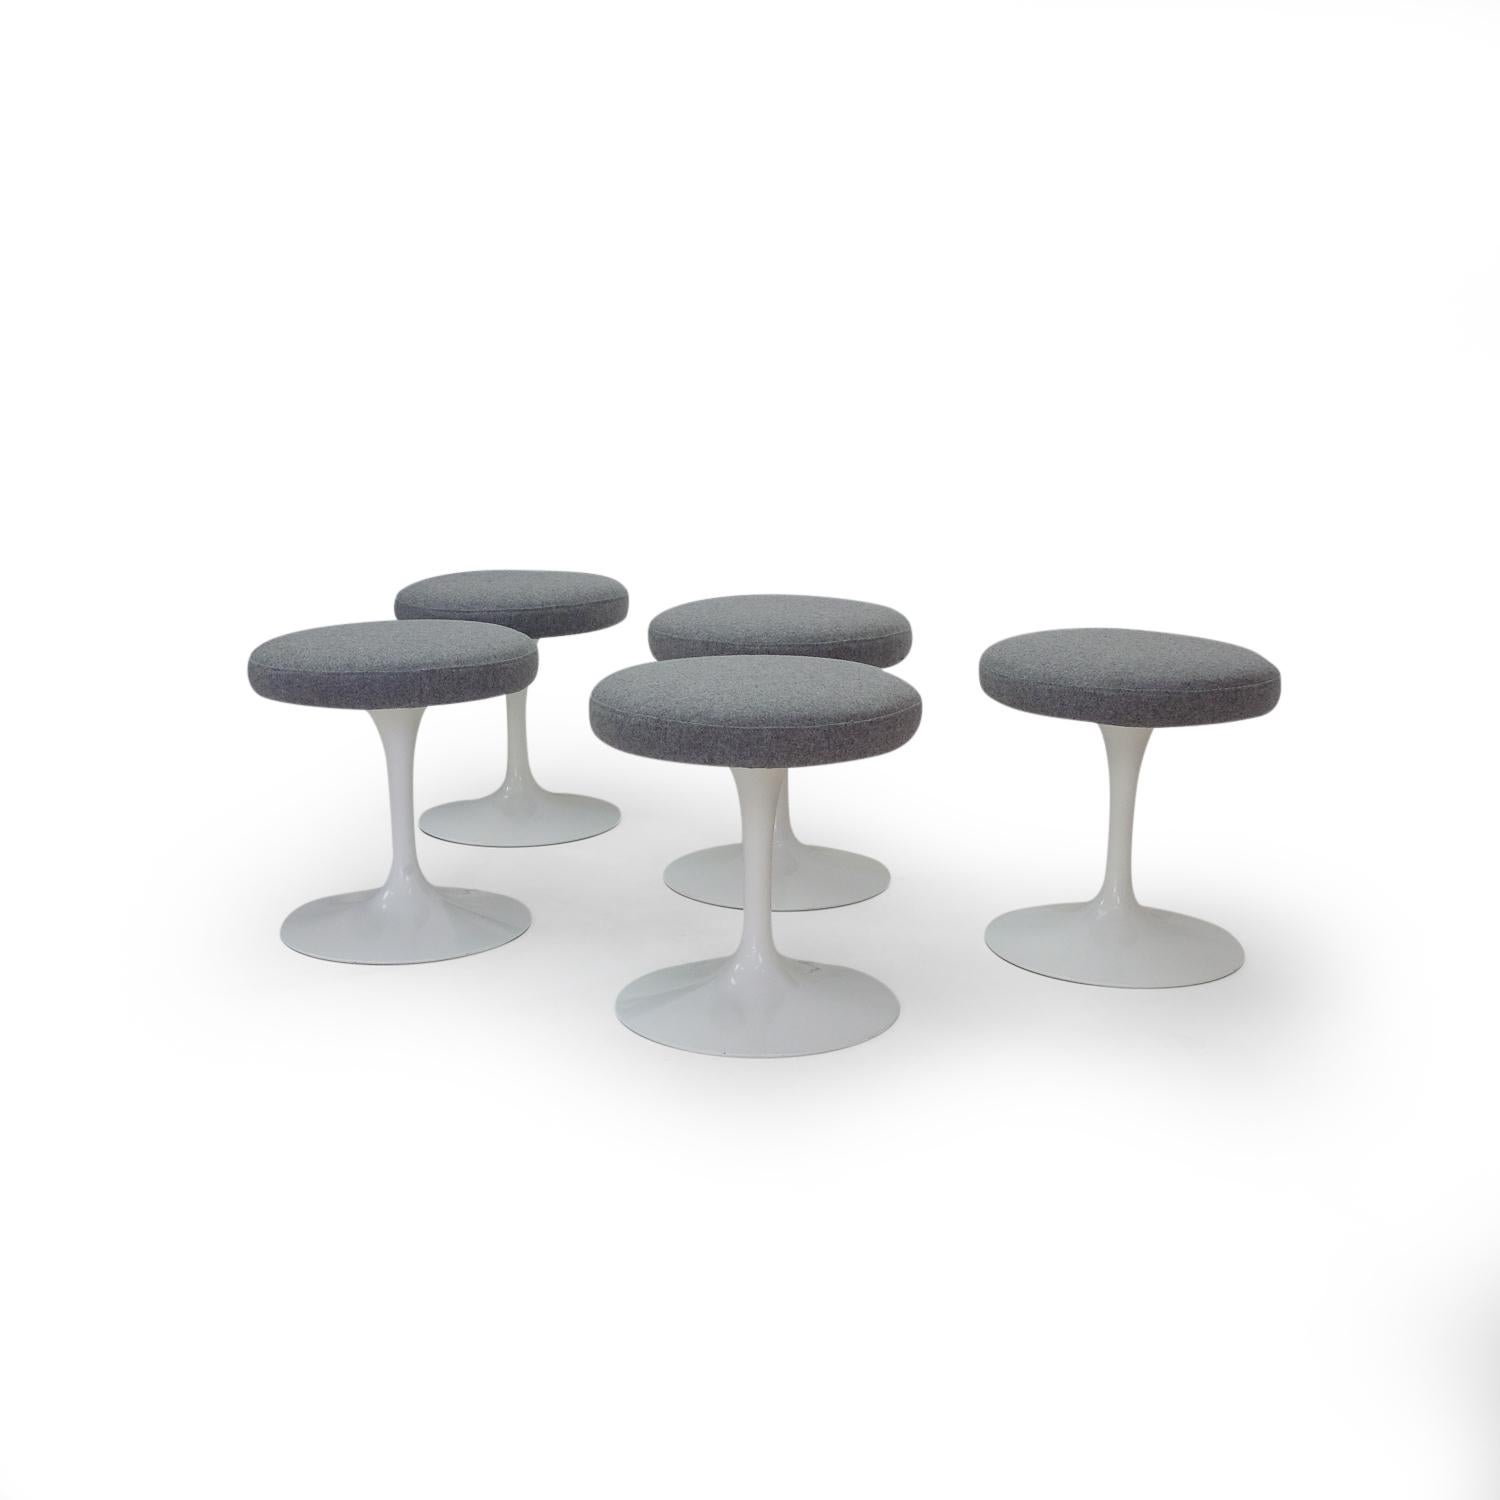 Set of five Knoll stools / tabourets designed by Eero Saarinen for Knoll International, produced in Switzerland during the 1970s.

Stools have been completely restored: We replaced the old fabric with a high quality grey wool, including new foam.